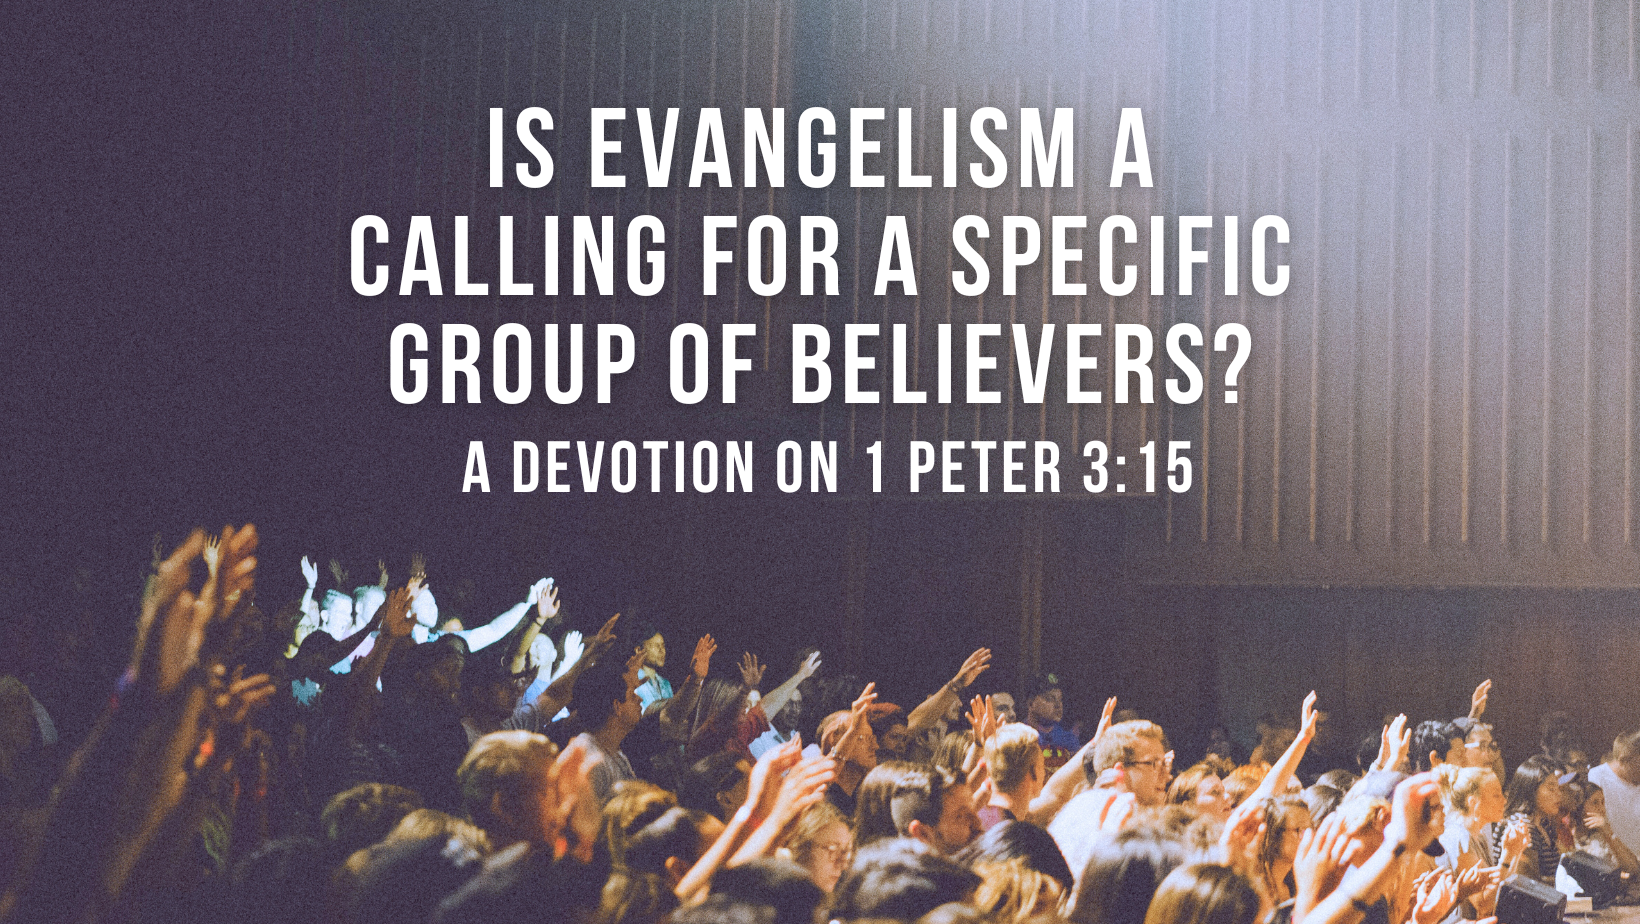 Is evangelism a calling for a specific group of believers?